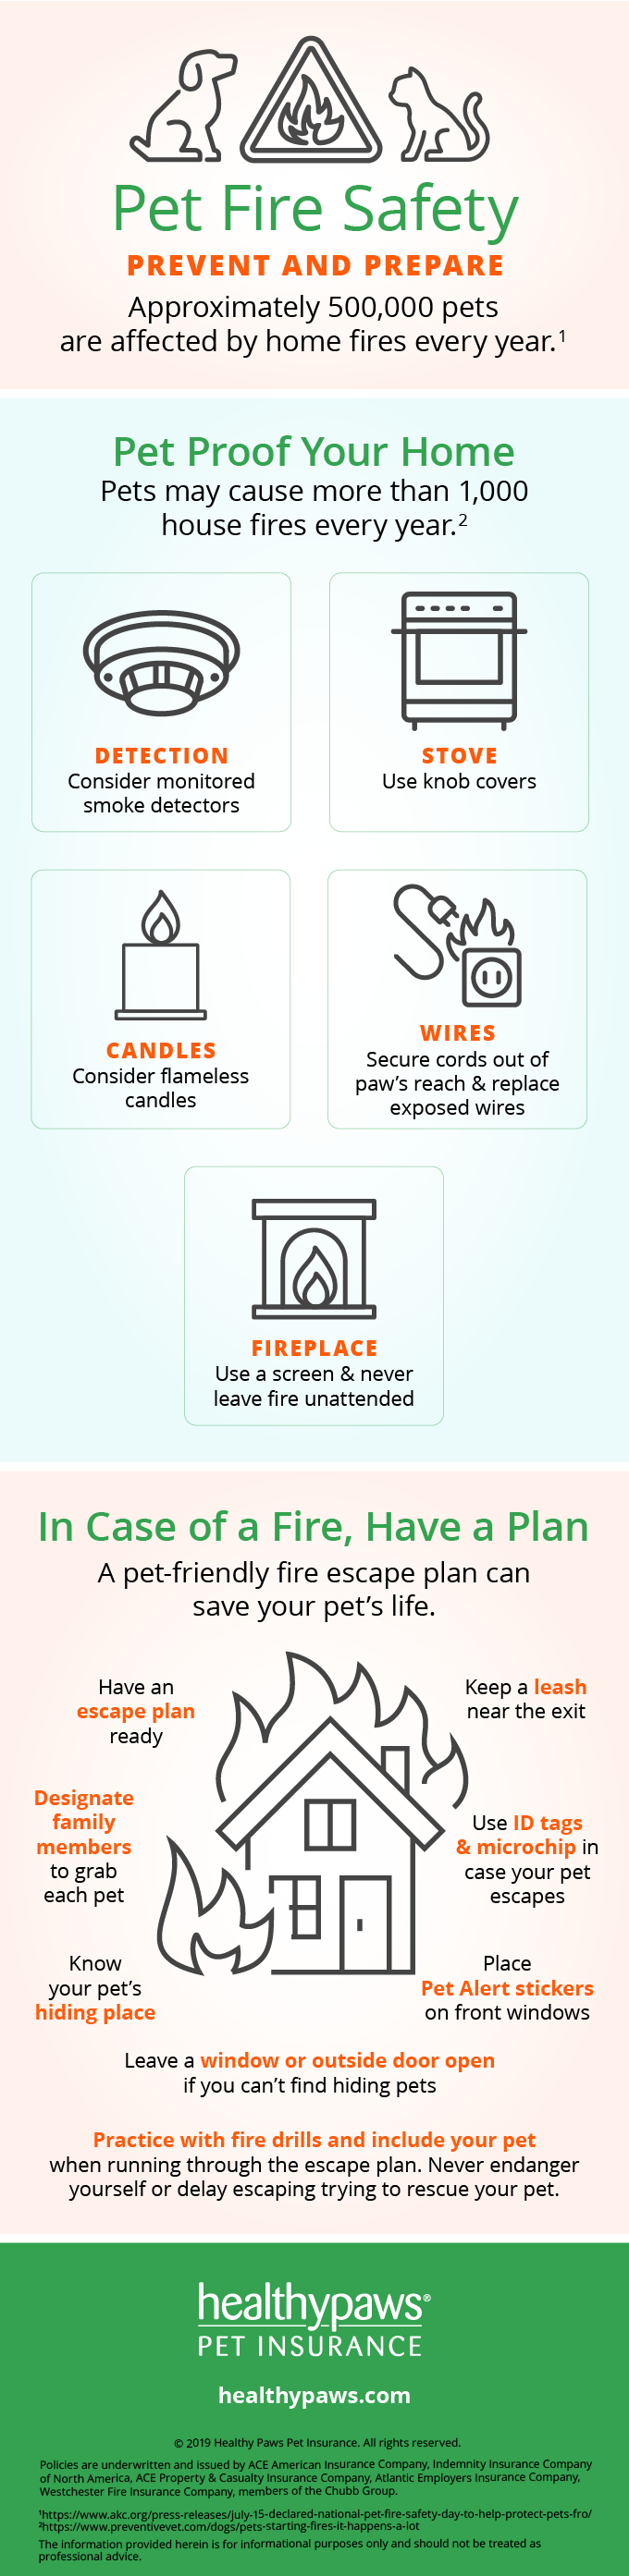 pet fire safety infographic